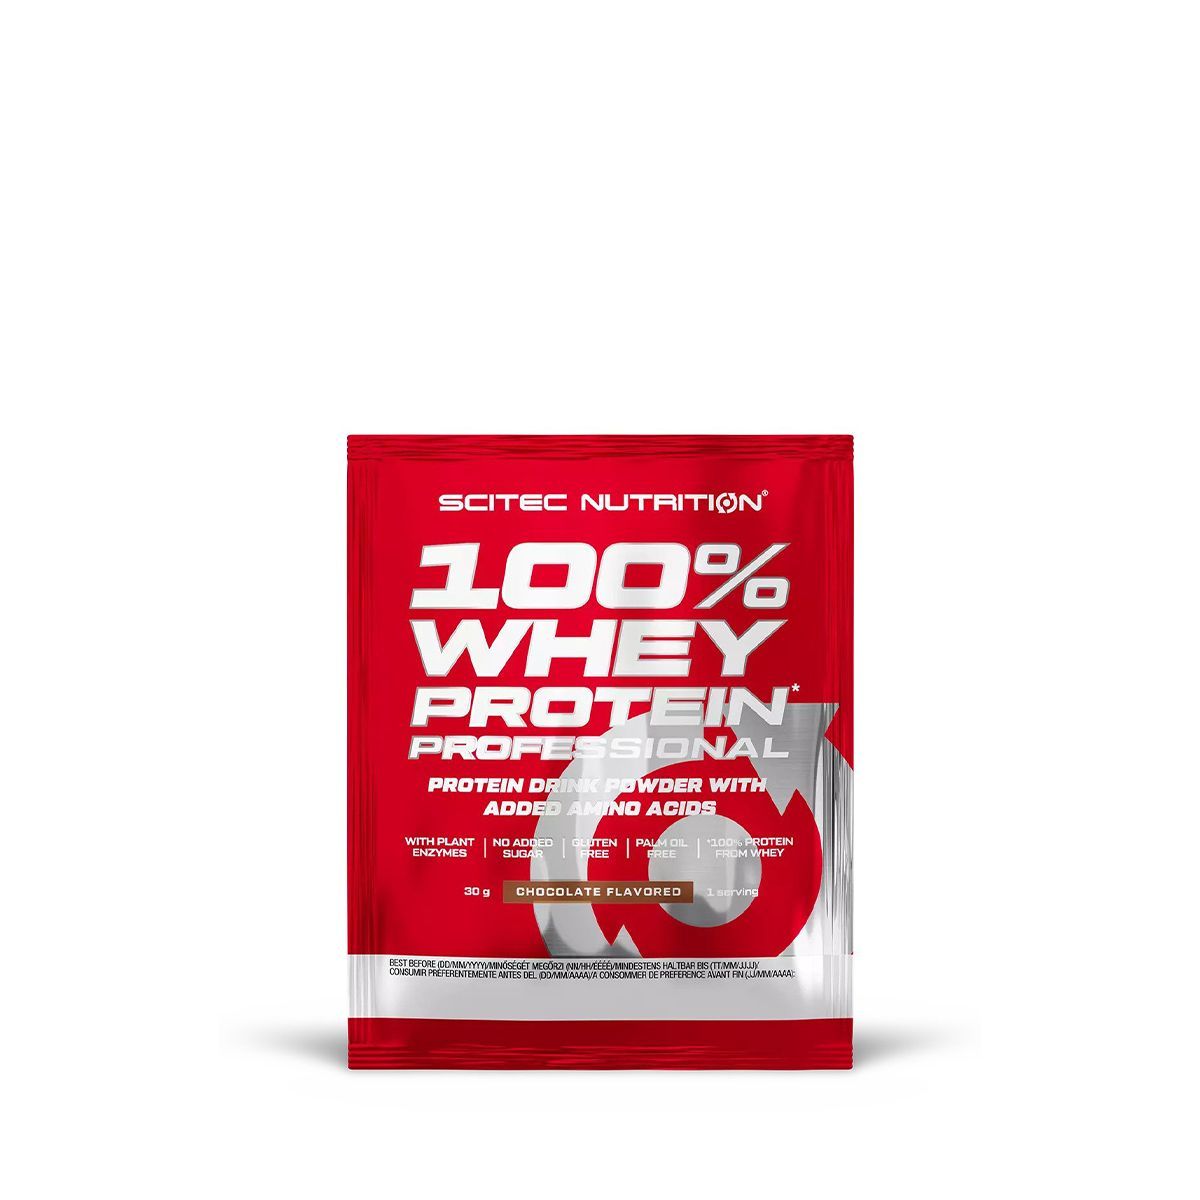 Scitec Nutrition - 100% Whey Protein Professional - 30gr